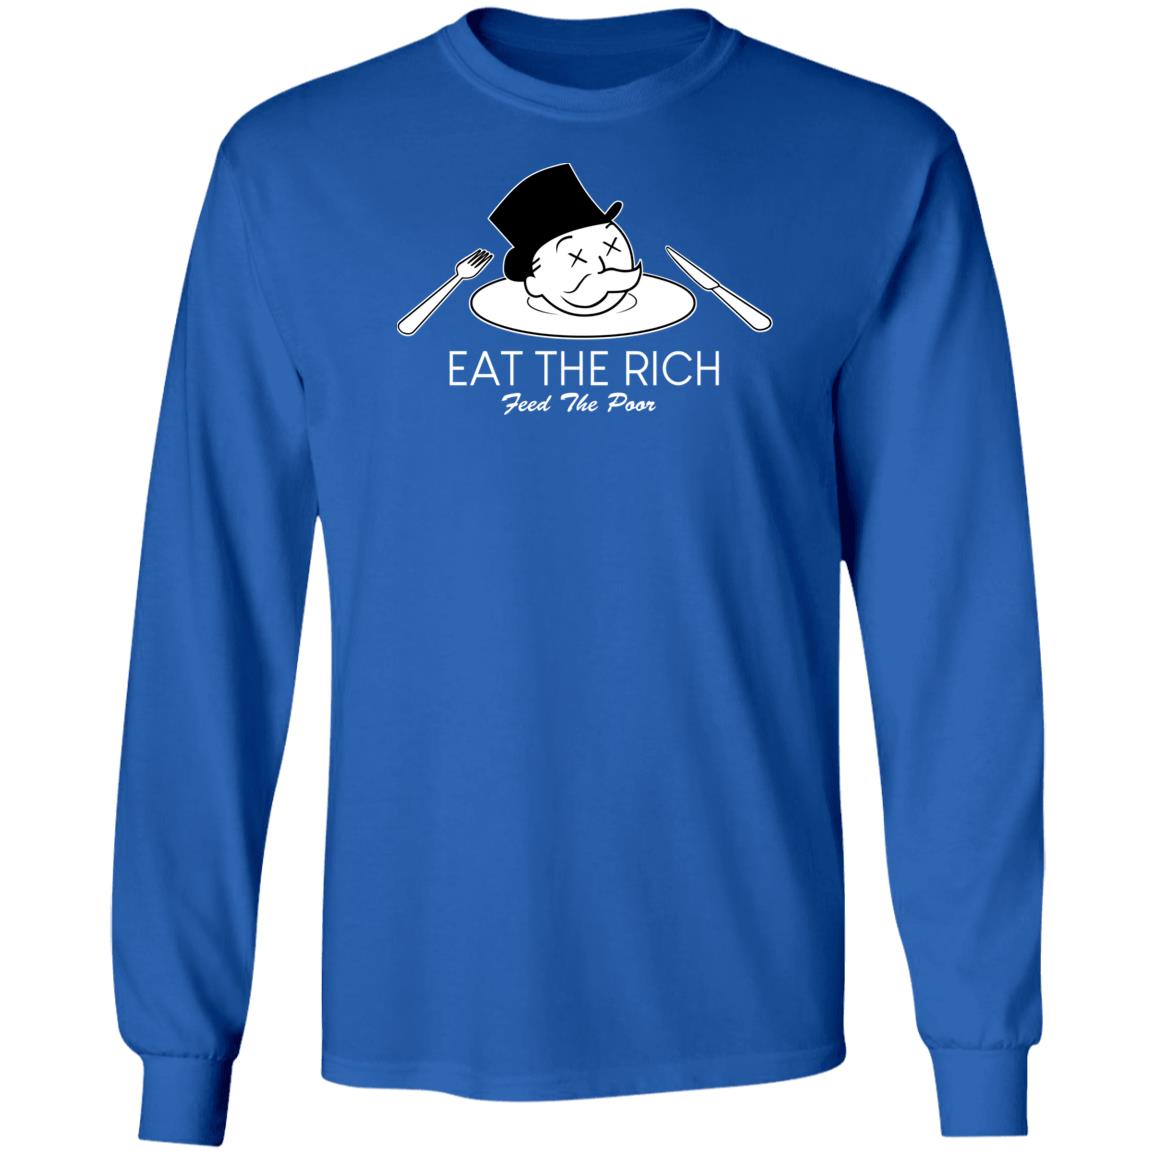 Eat The Rich Feed The Poor T Shirt